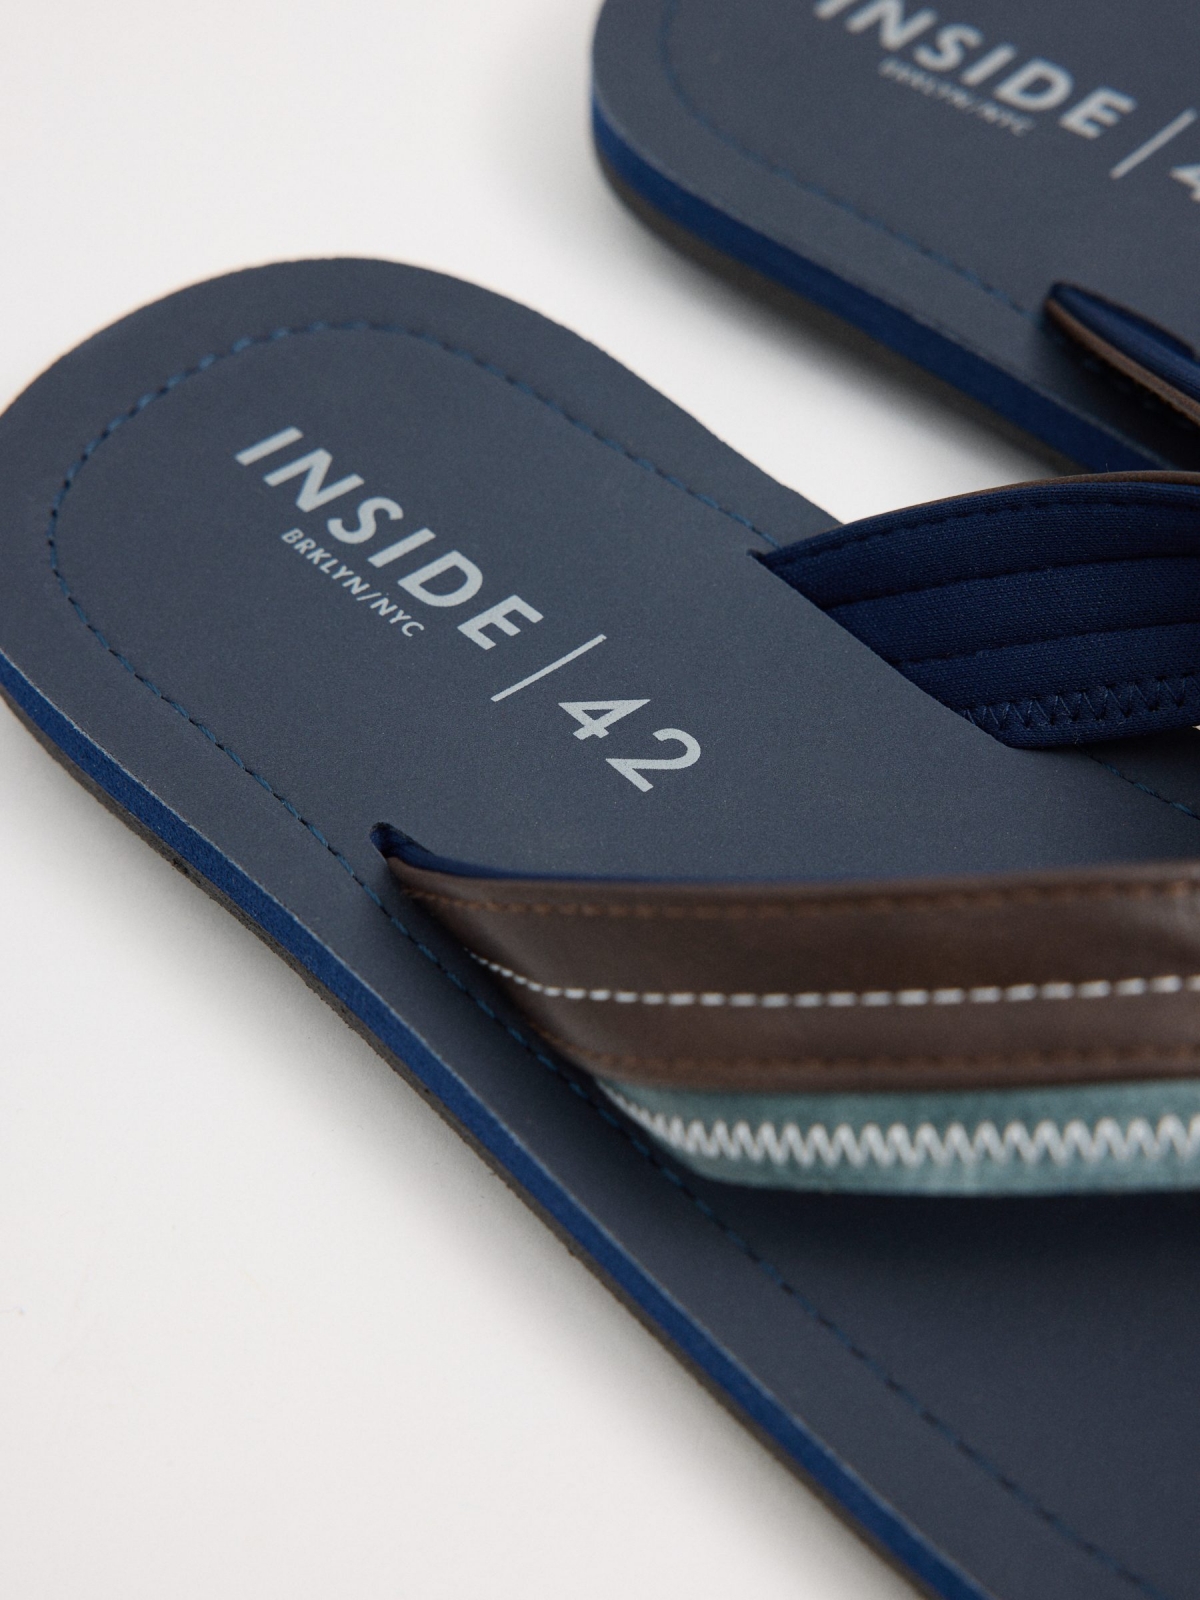 Navy blue toe sandals navy detail view